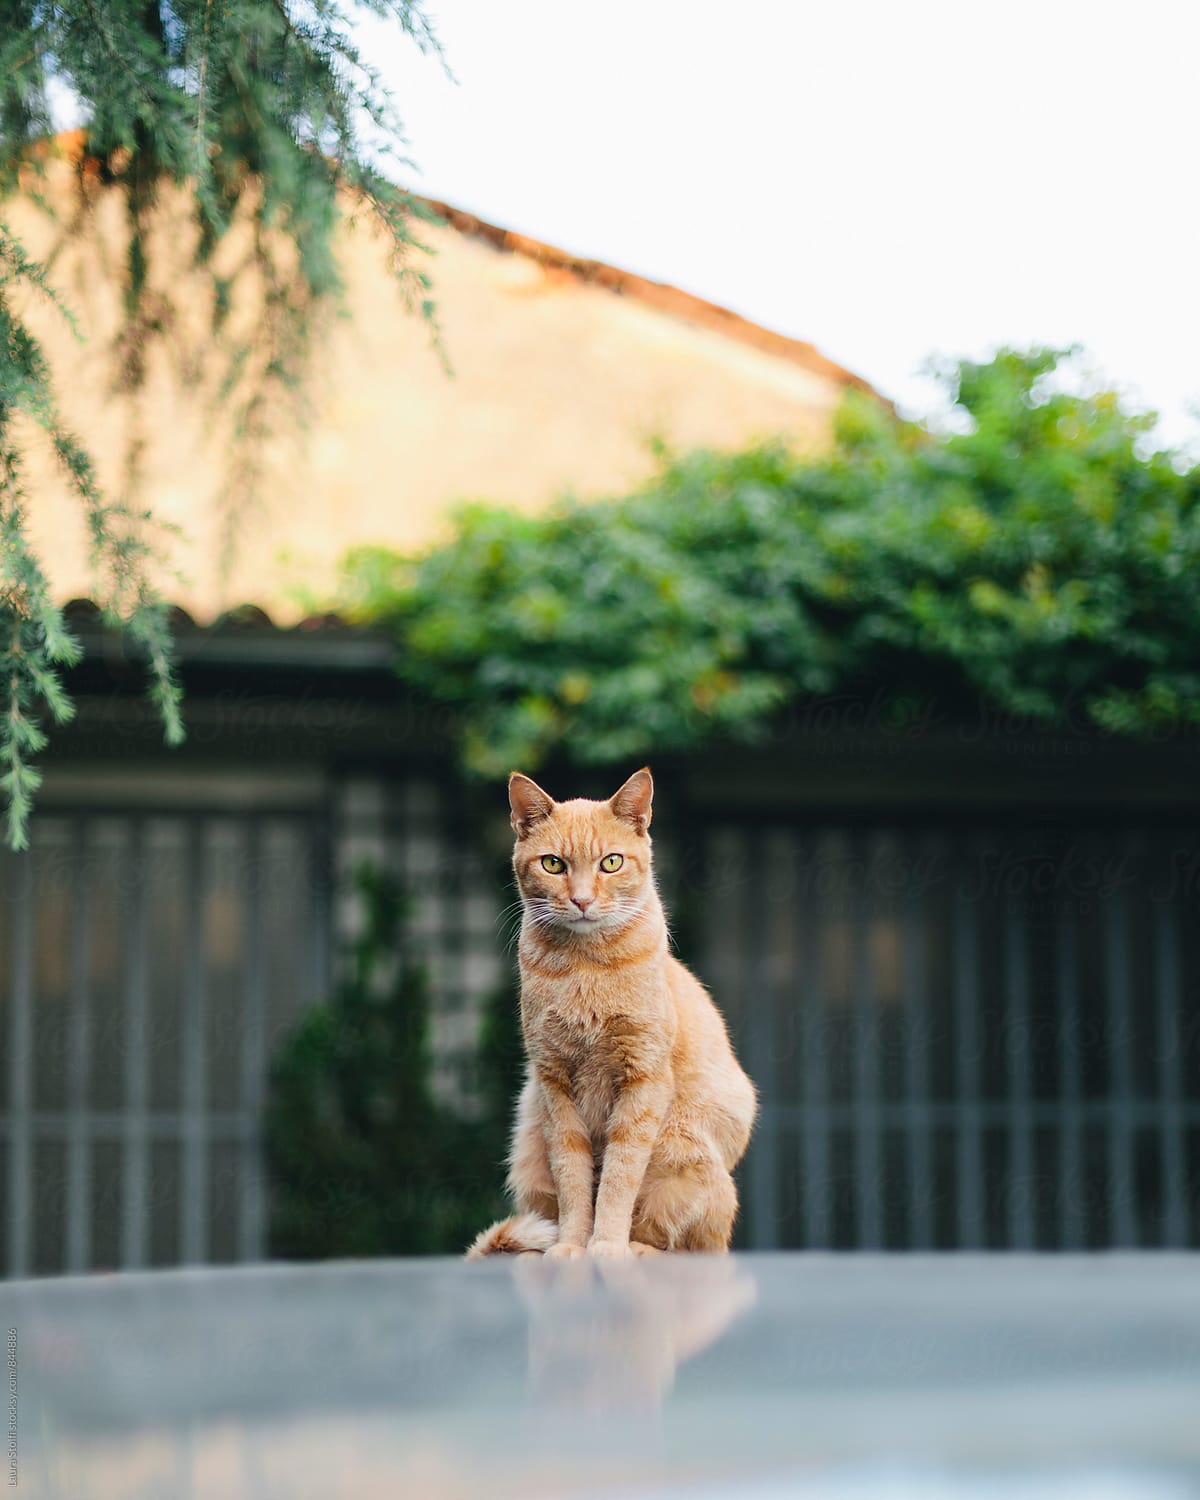 Red cat sits on top of car and looks straight at the camera, bright day, summer outdoor